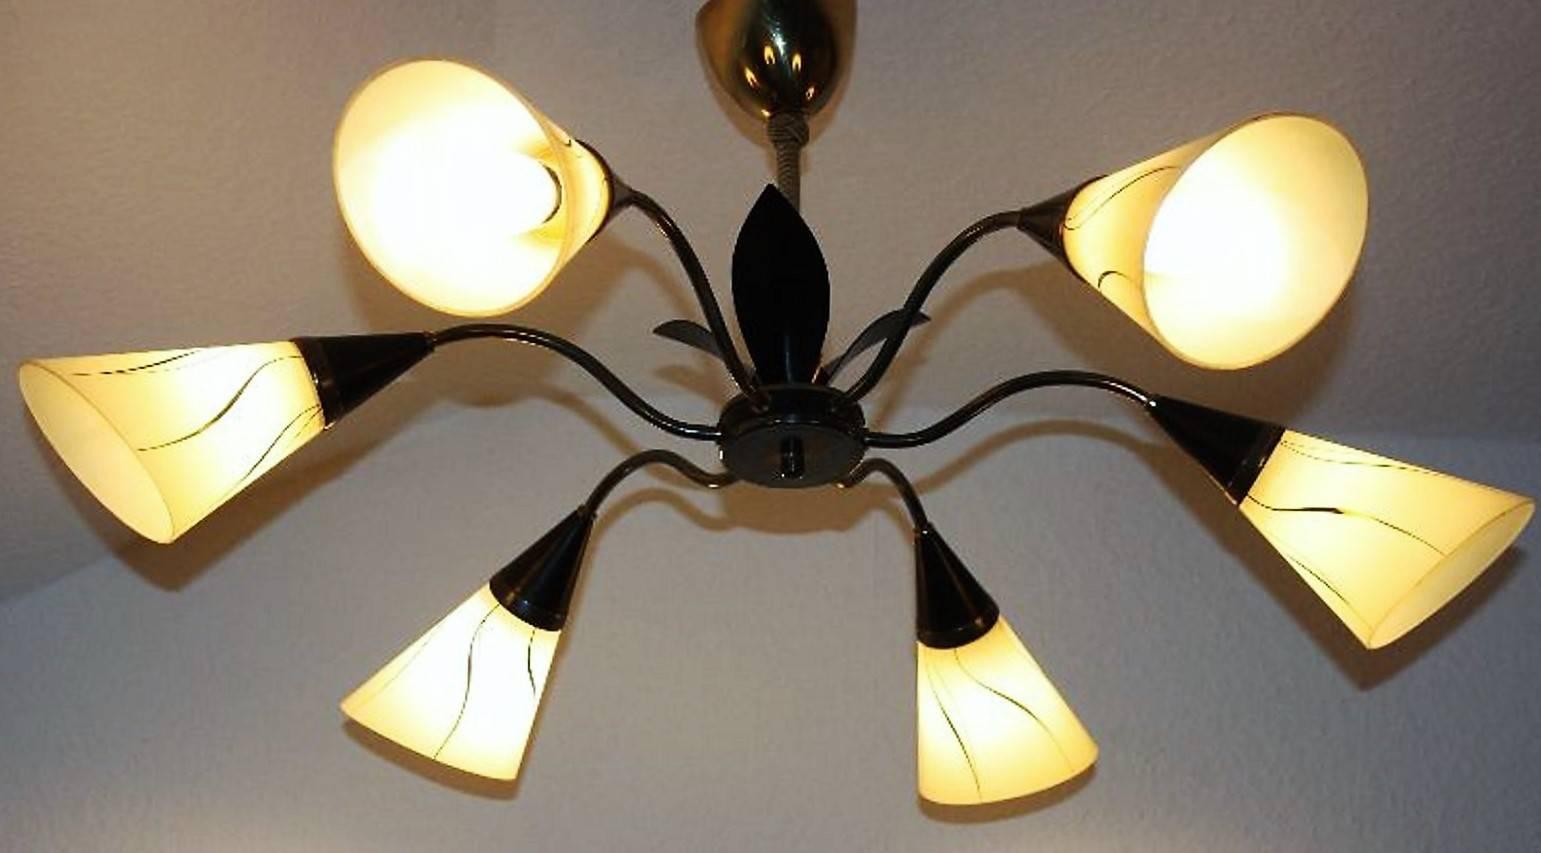 Mid-Century Modern "Sputnik" chandelier, Germany, circa 1950s.
Six-light black lacquered metal and brass frame with six opal glass shades.
Socket: Six x Edison (e14) for standard screw bulbs.
Excellent condition.